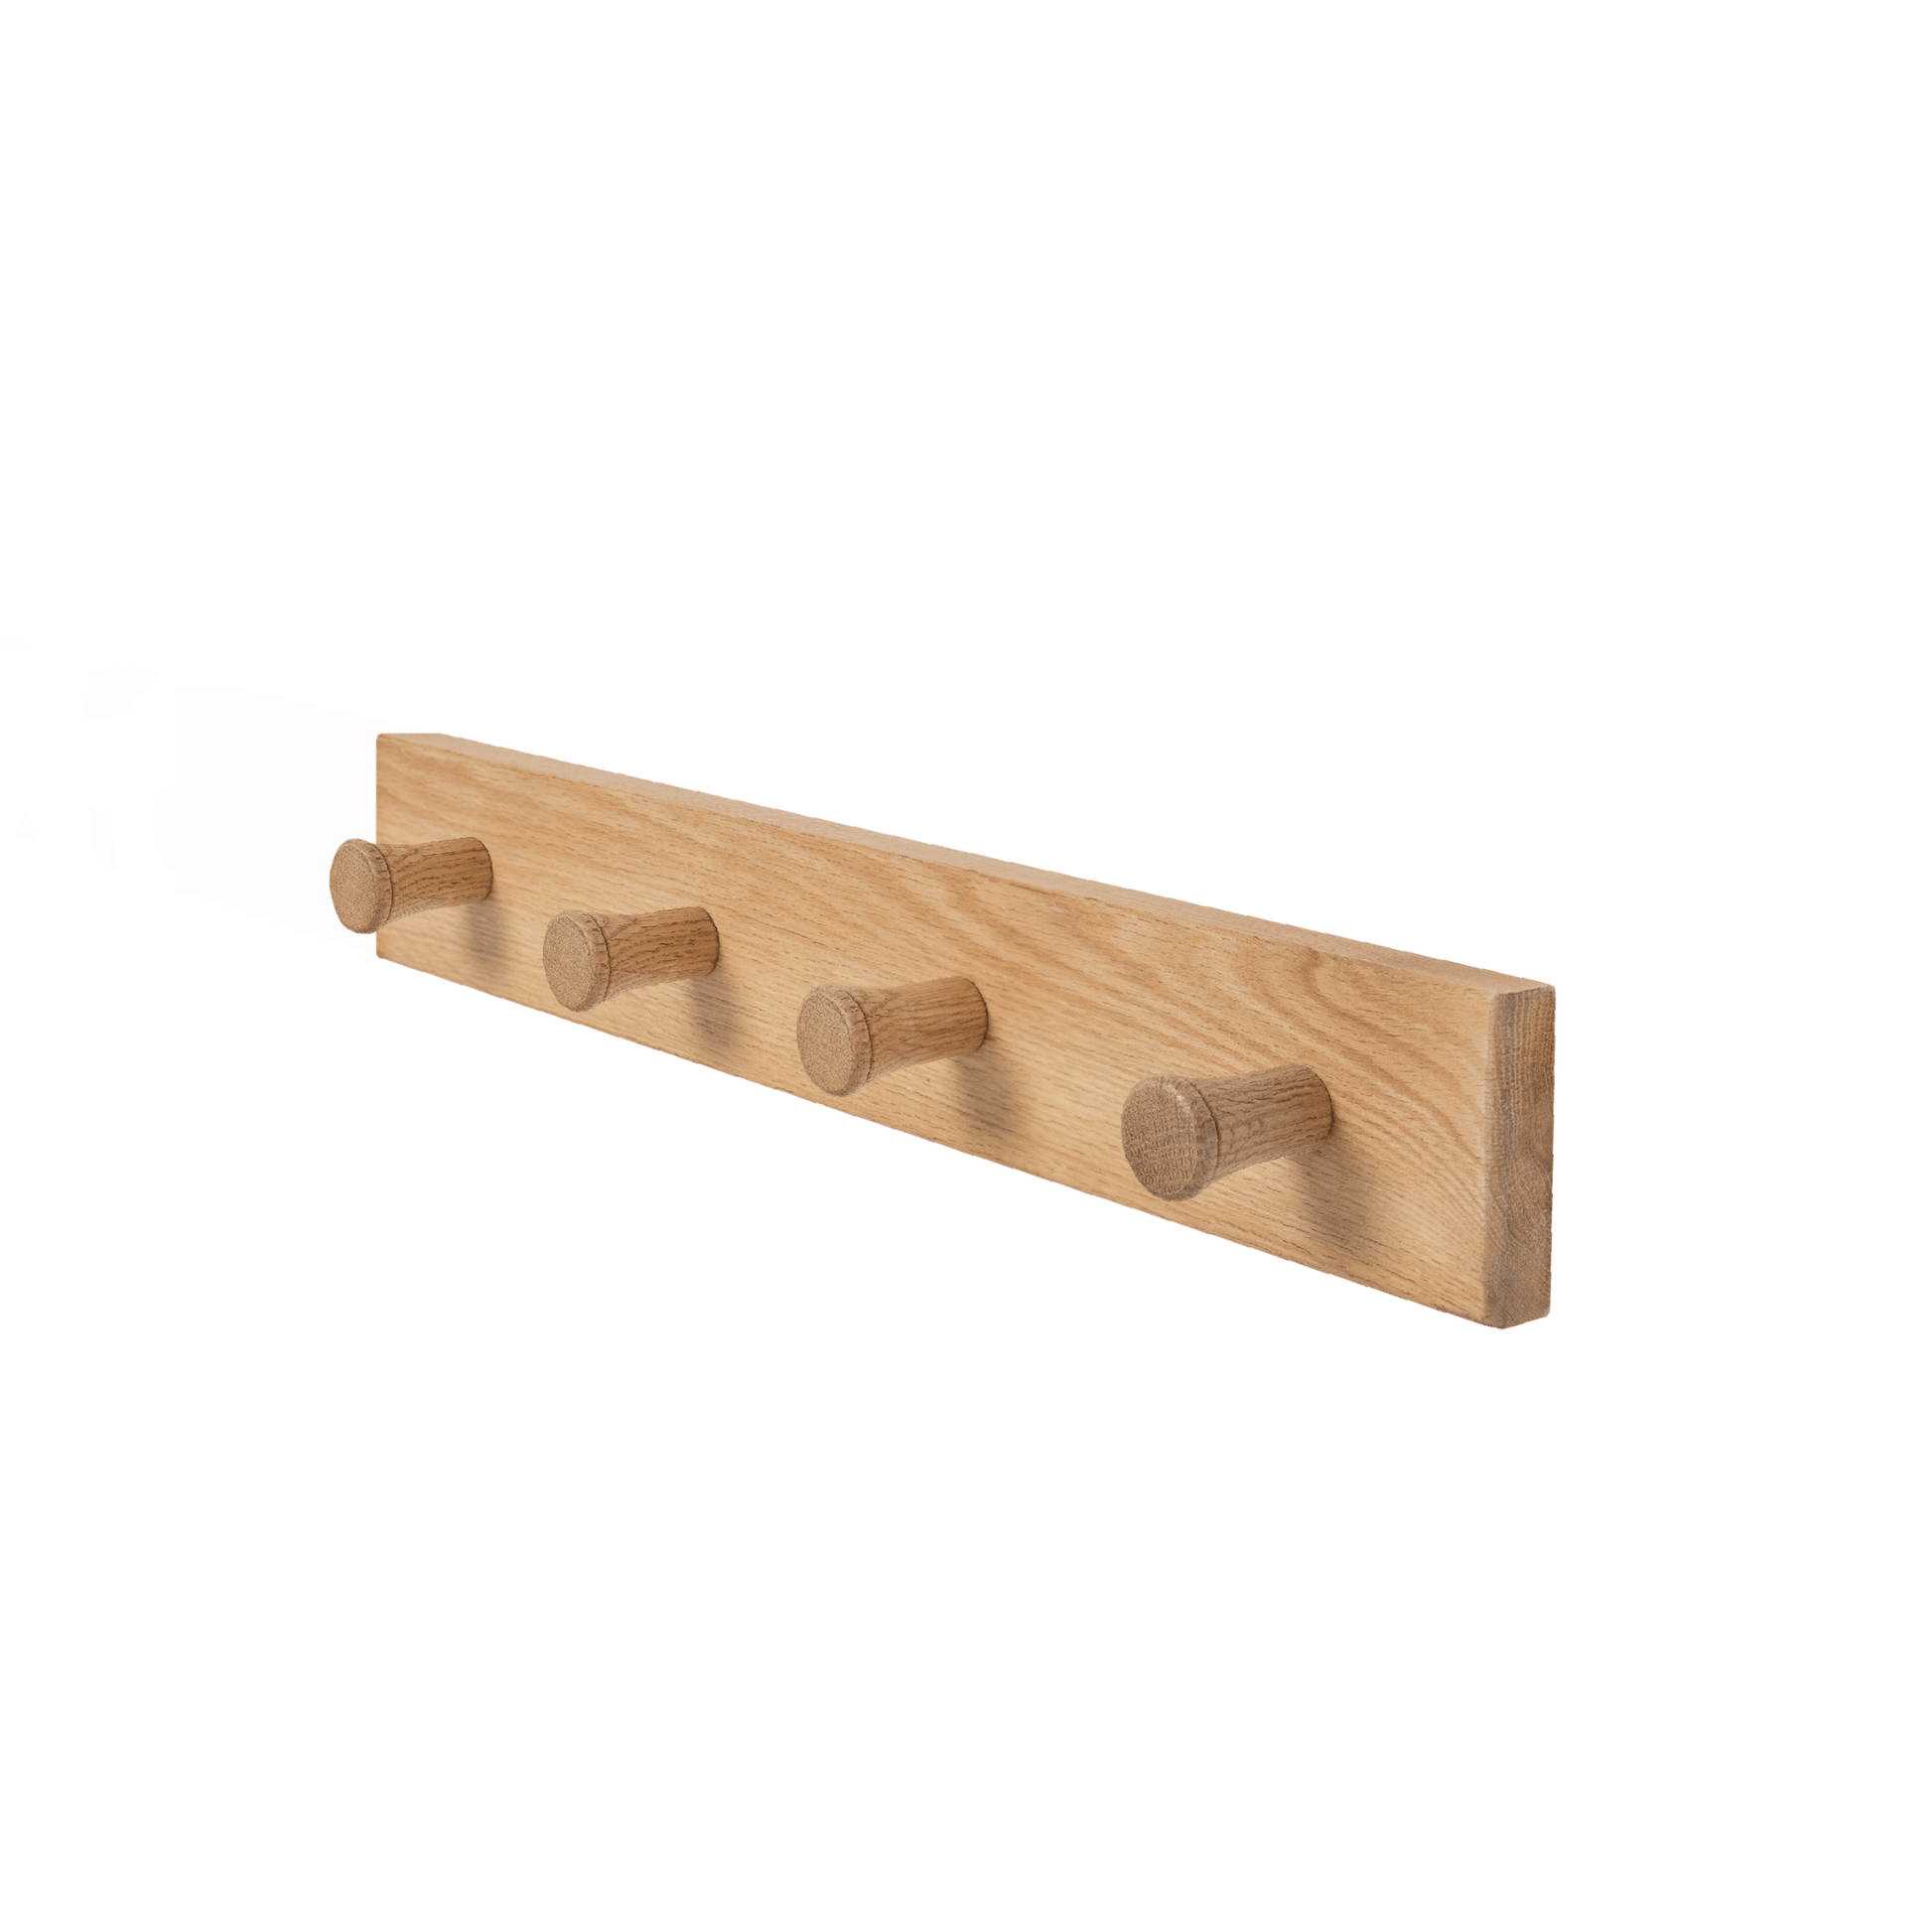 Wall Mounted Coat Hanger -Solid Oak - (4 Extra Thick Non Slip Pegs 108cm Long X 8.5cm Wide) - Hangersforless